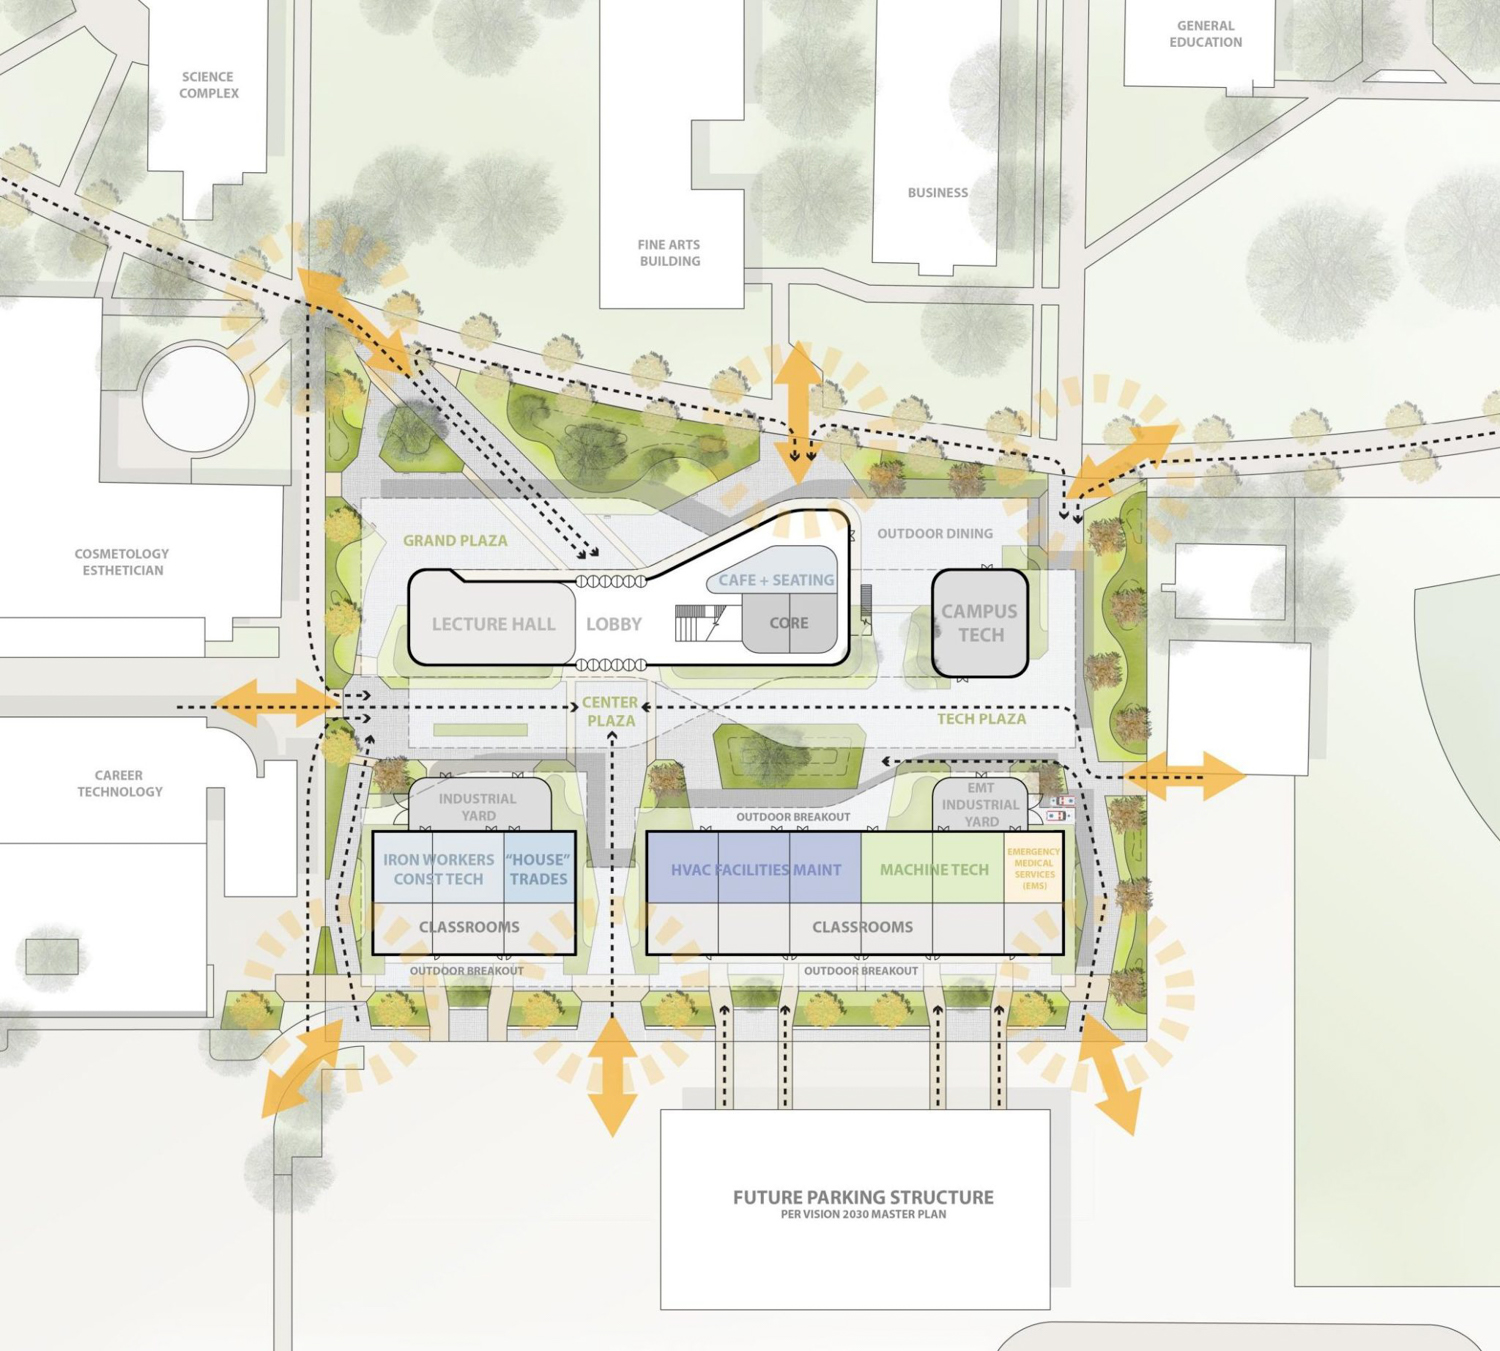 San Jose City College Career Education Complex site map, illustration by Steinberg Hart